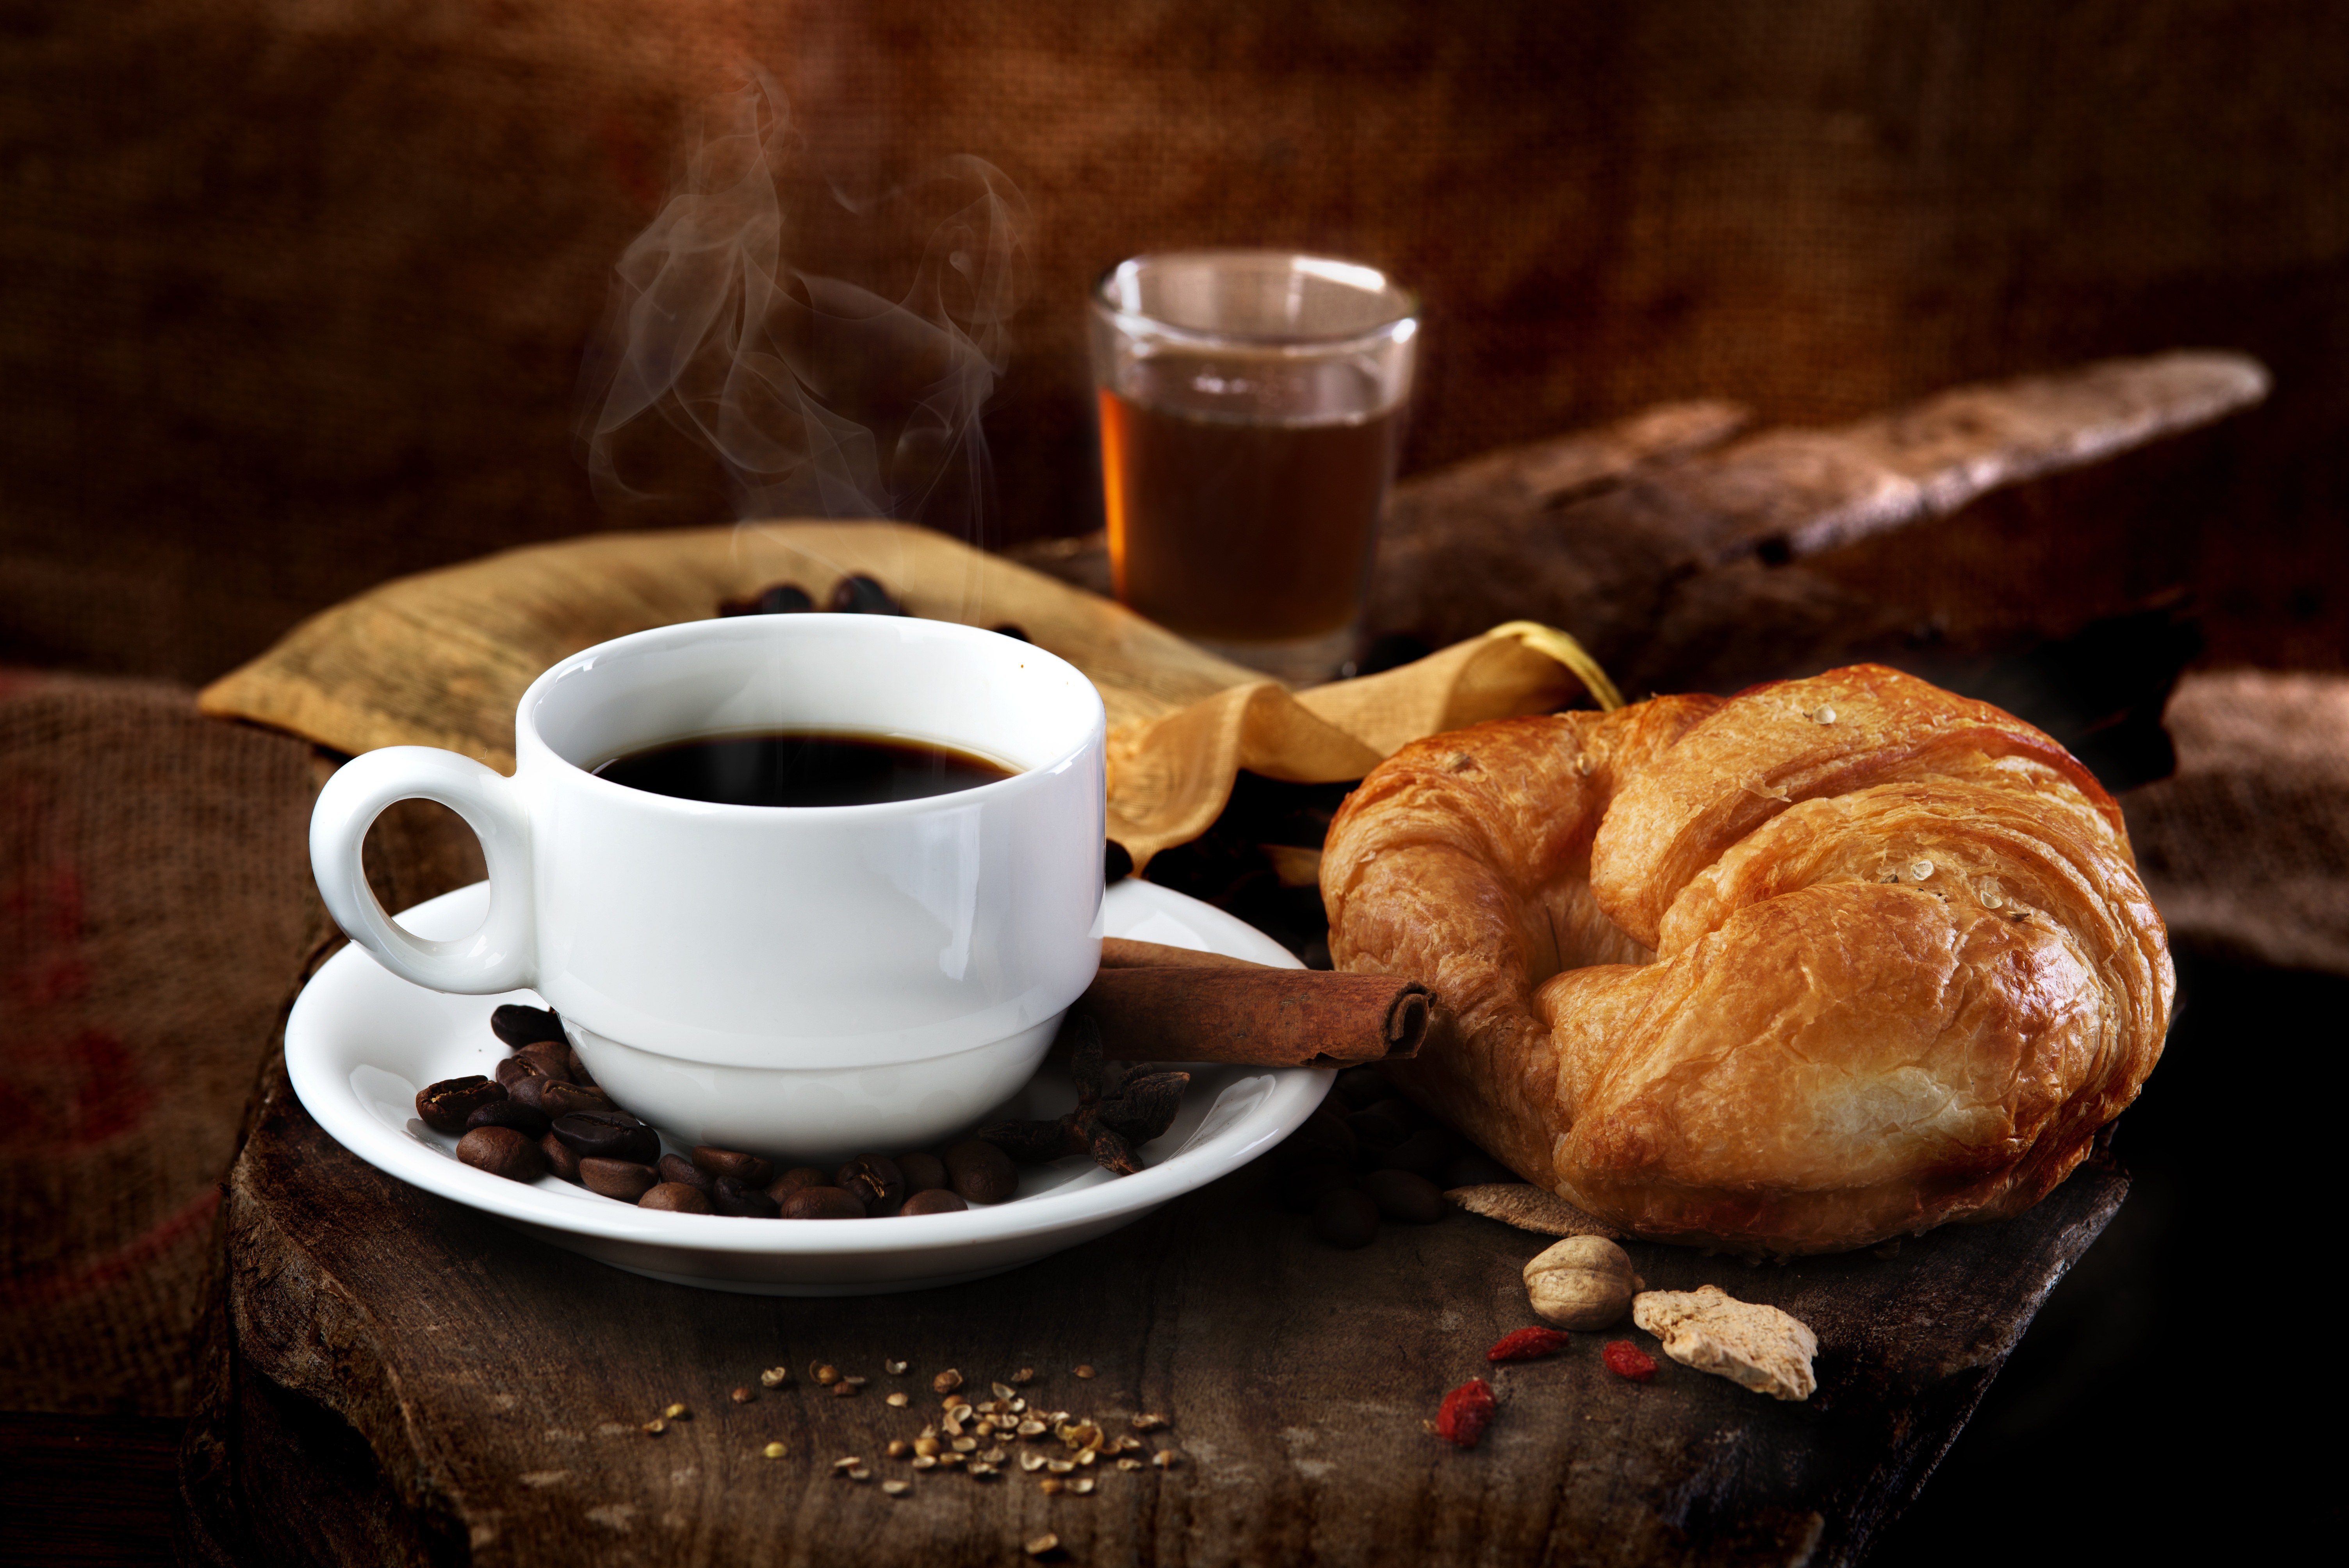 food, coffee, cinnamon, coffee beans, croissant, cup, drink, still life, viennoiserie